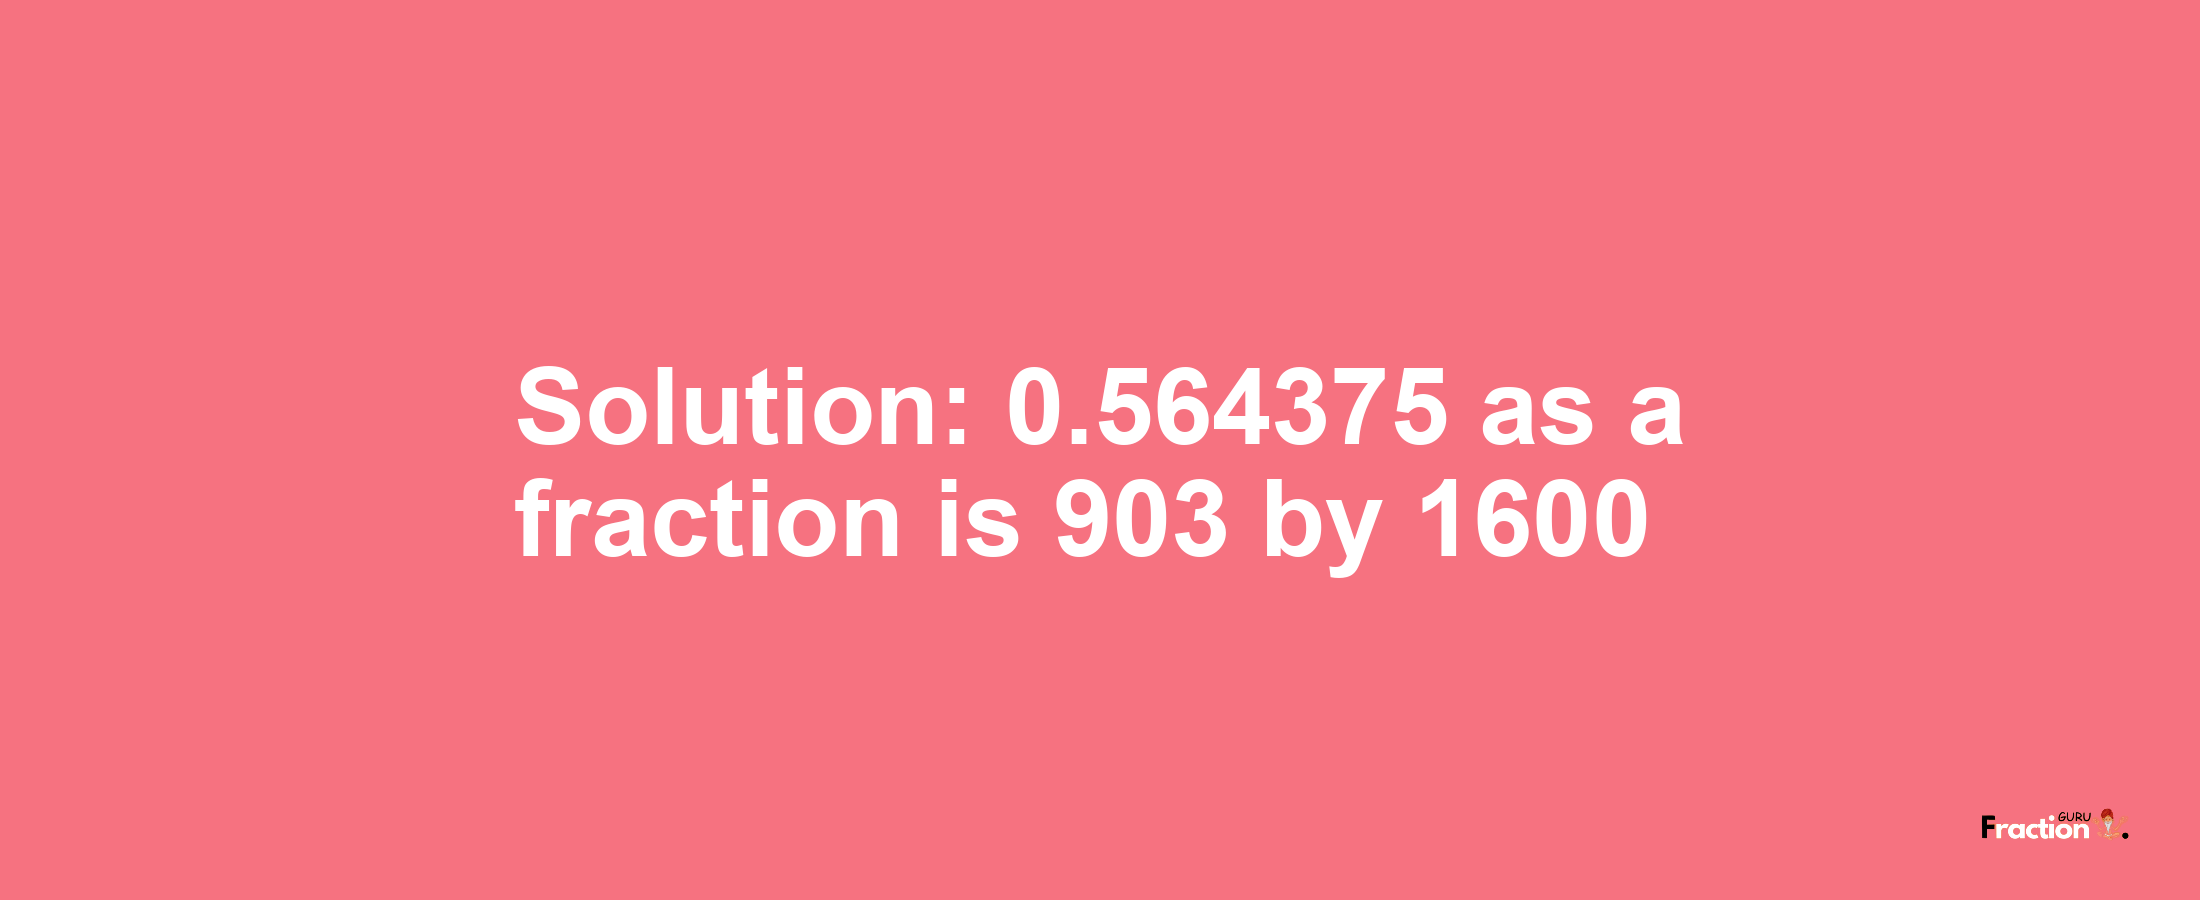 Solution:0.564375 as a fraction is 903/1600